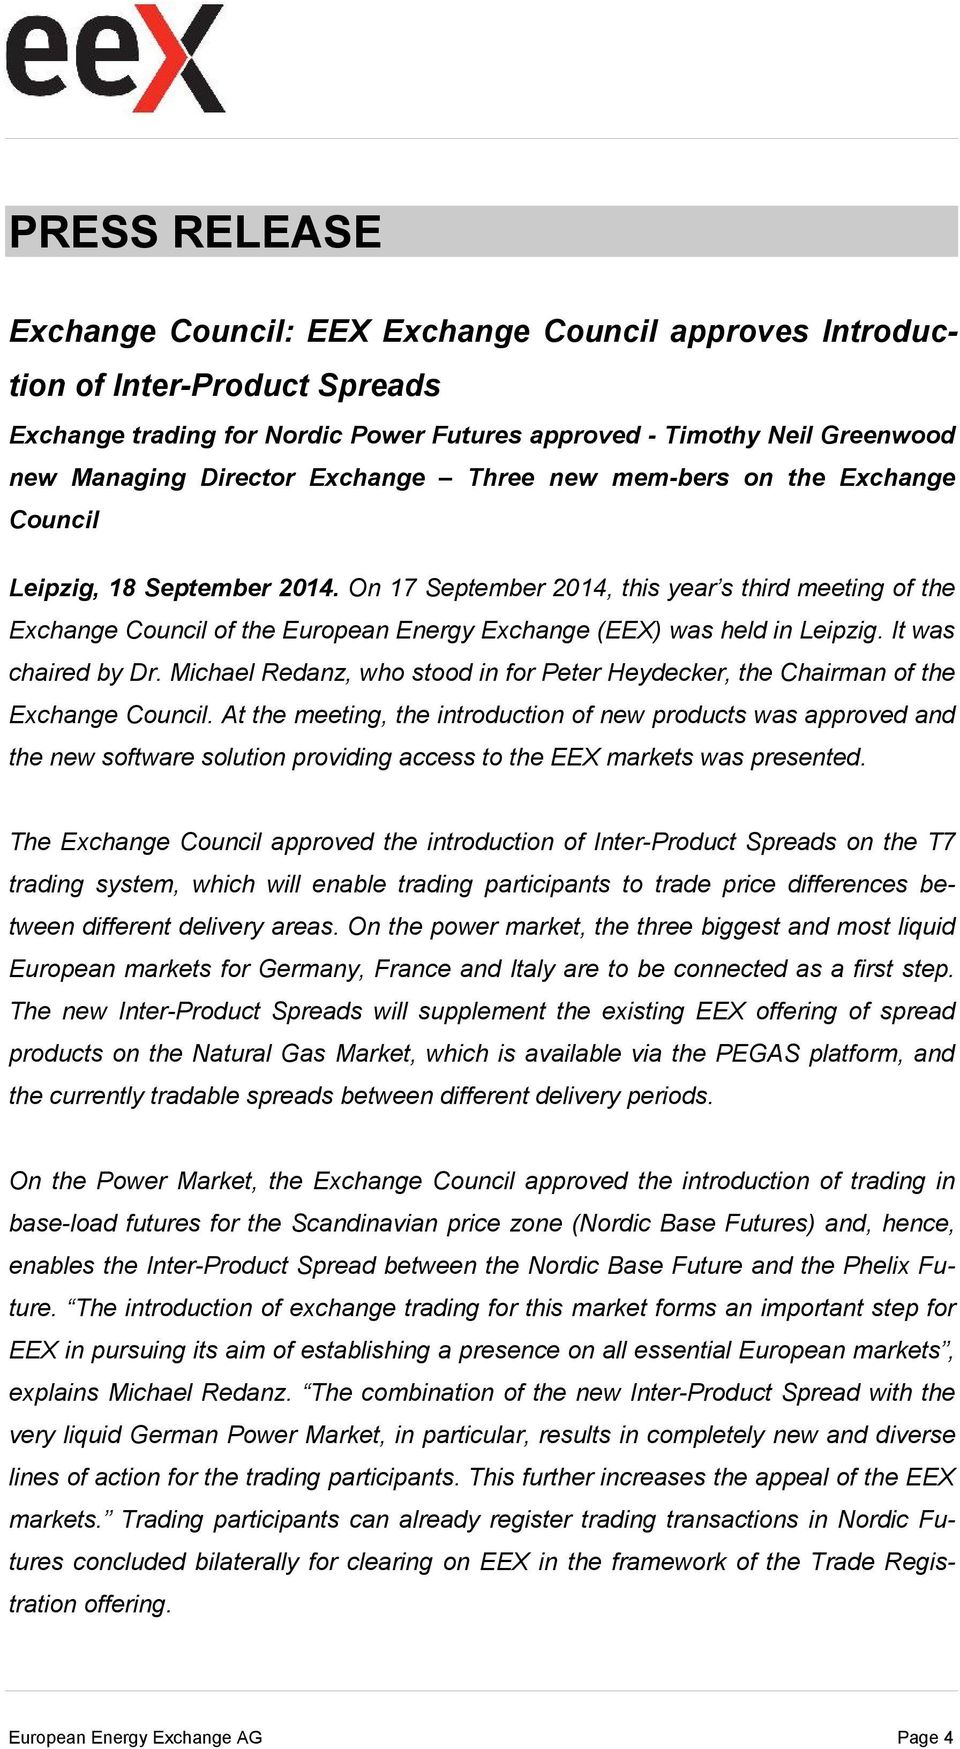 On 17 September 2014, this year s third meeting of the Exchange Council of the European Energy Exchange (EEX) was held in Leipzig. It was chaired by Dr.